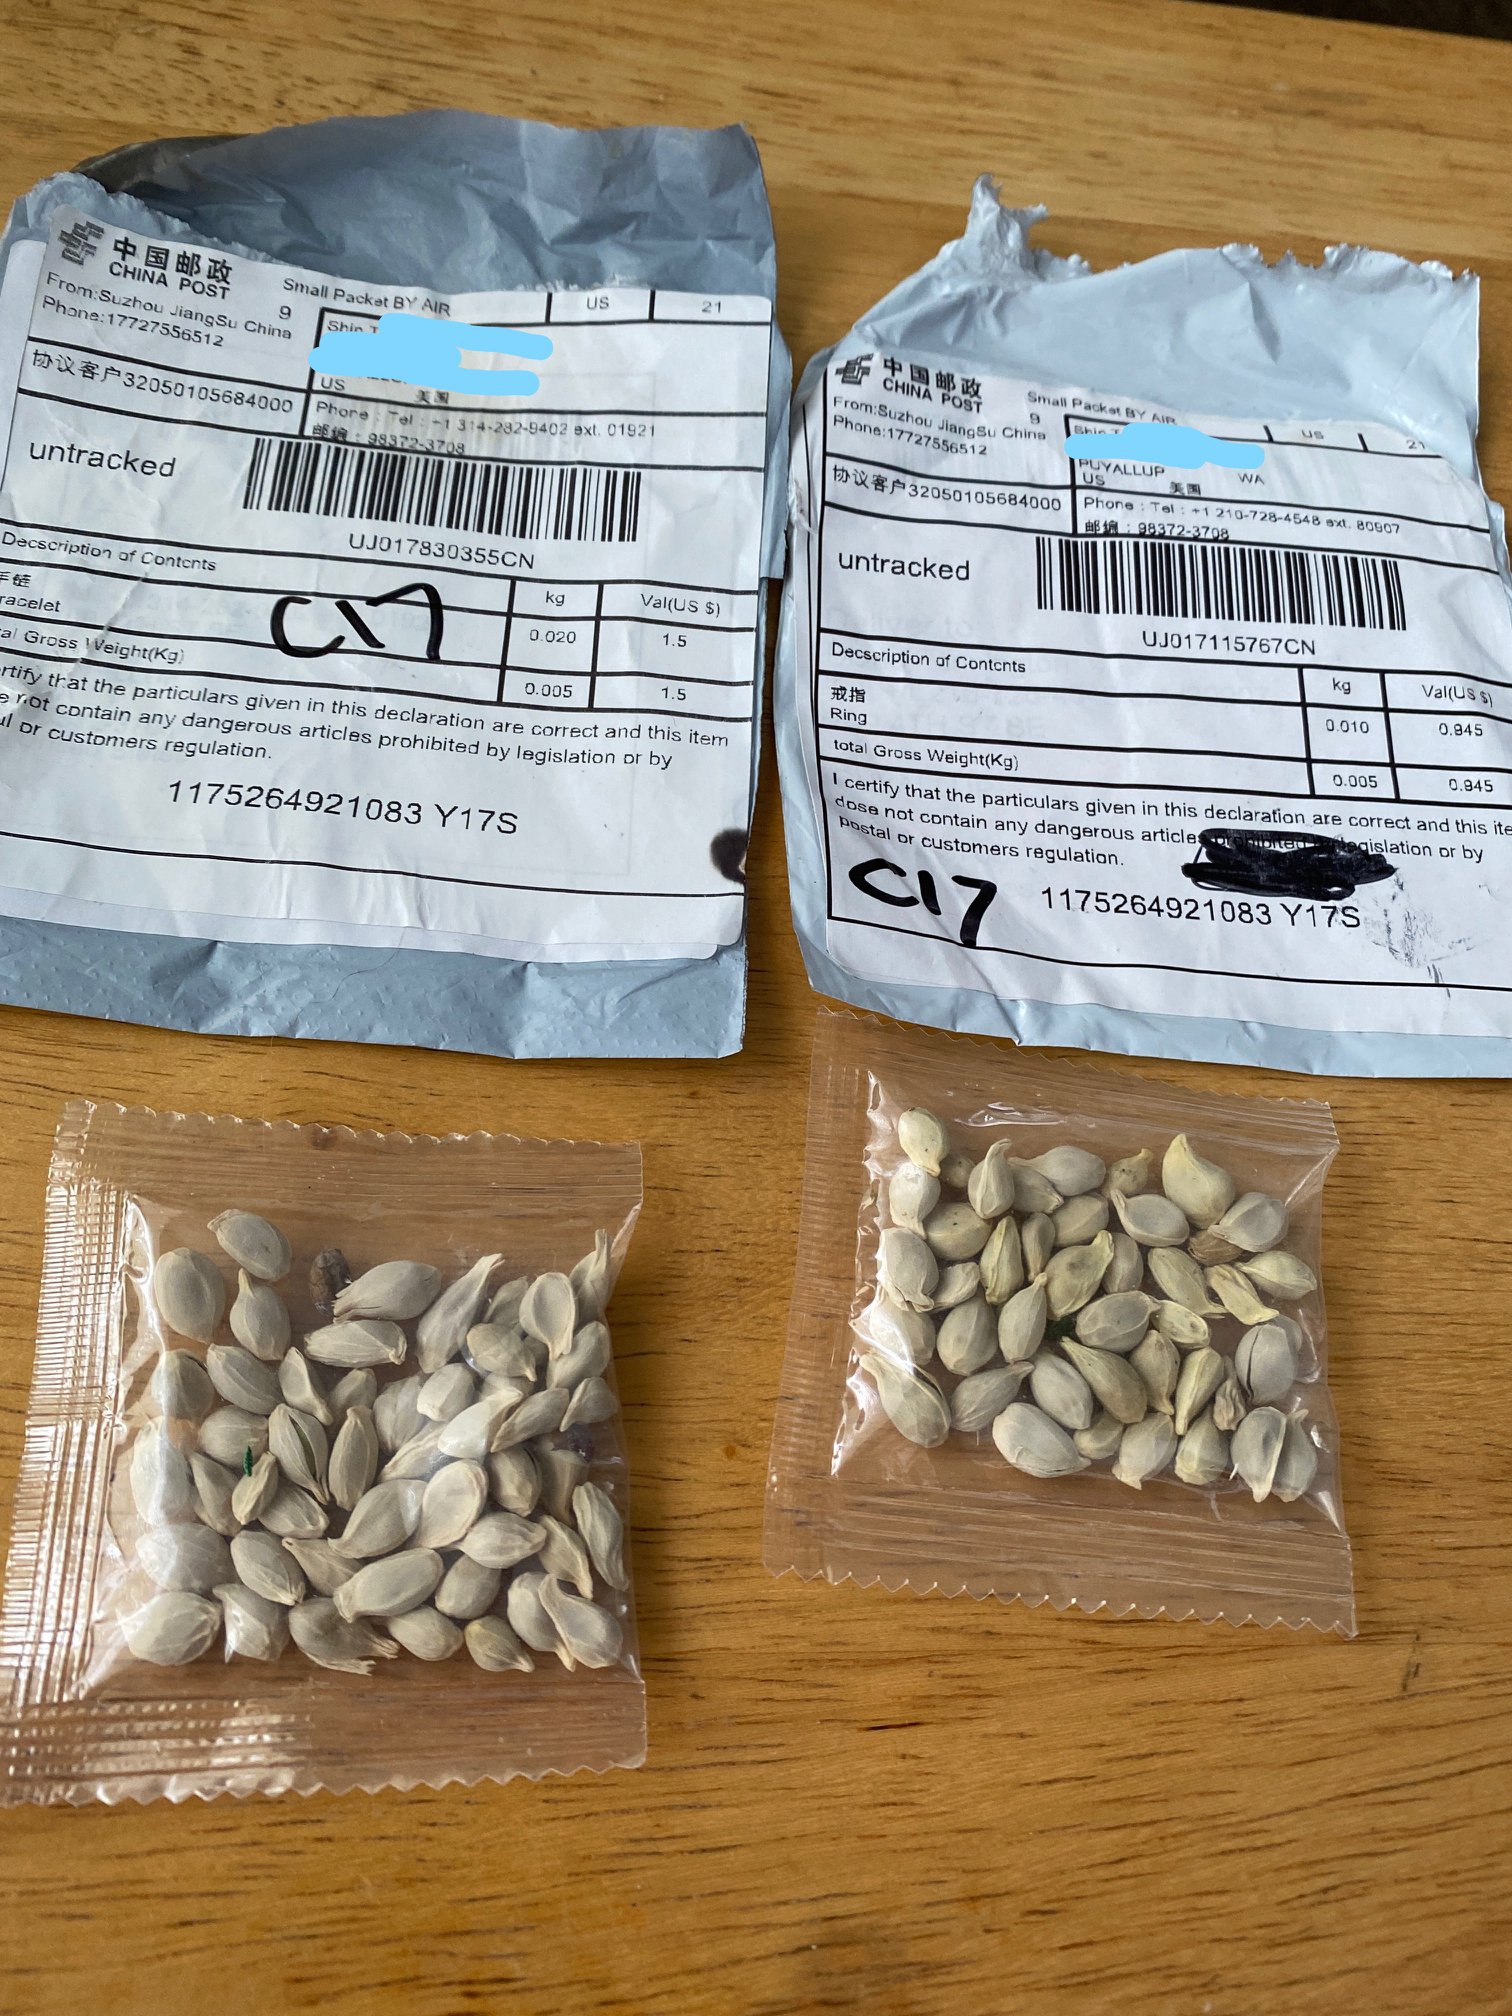 Mystery seeds from China